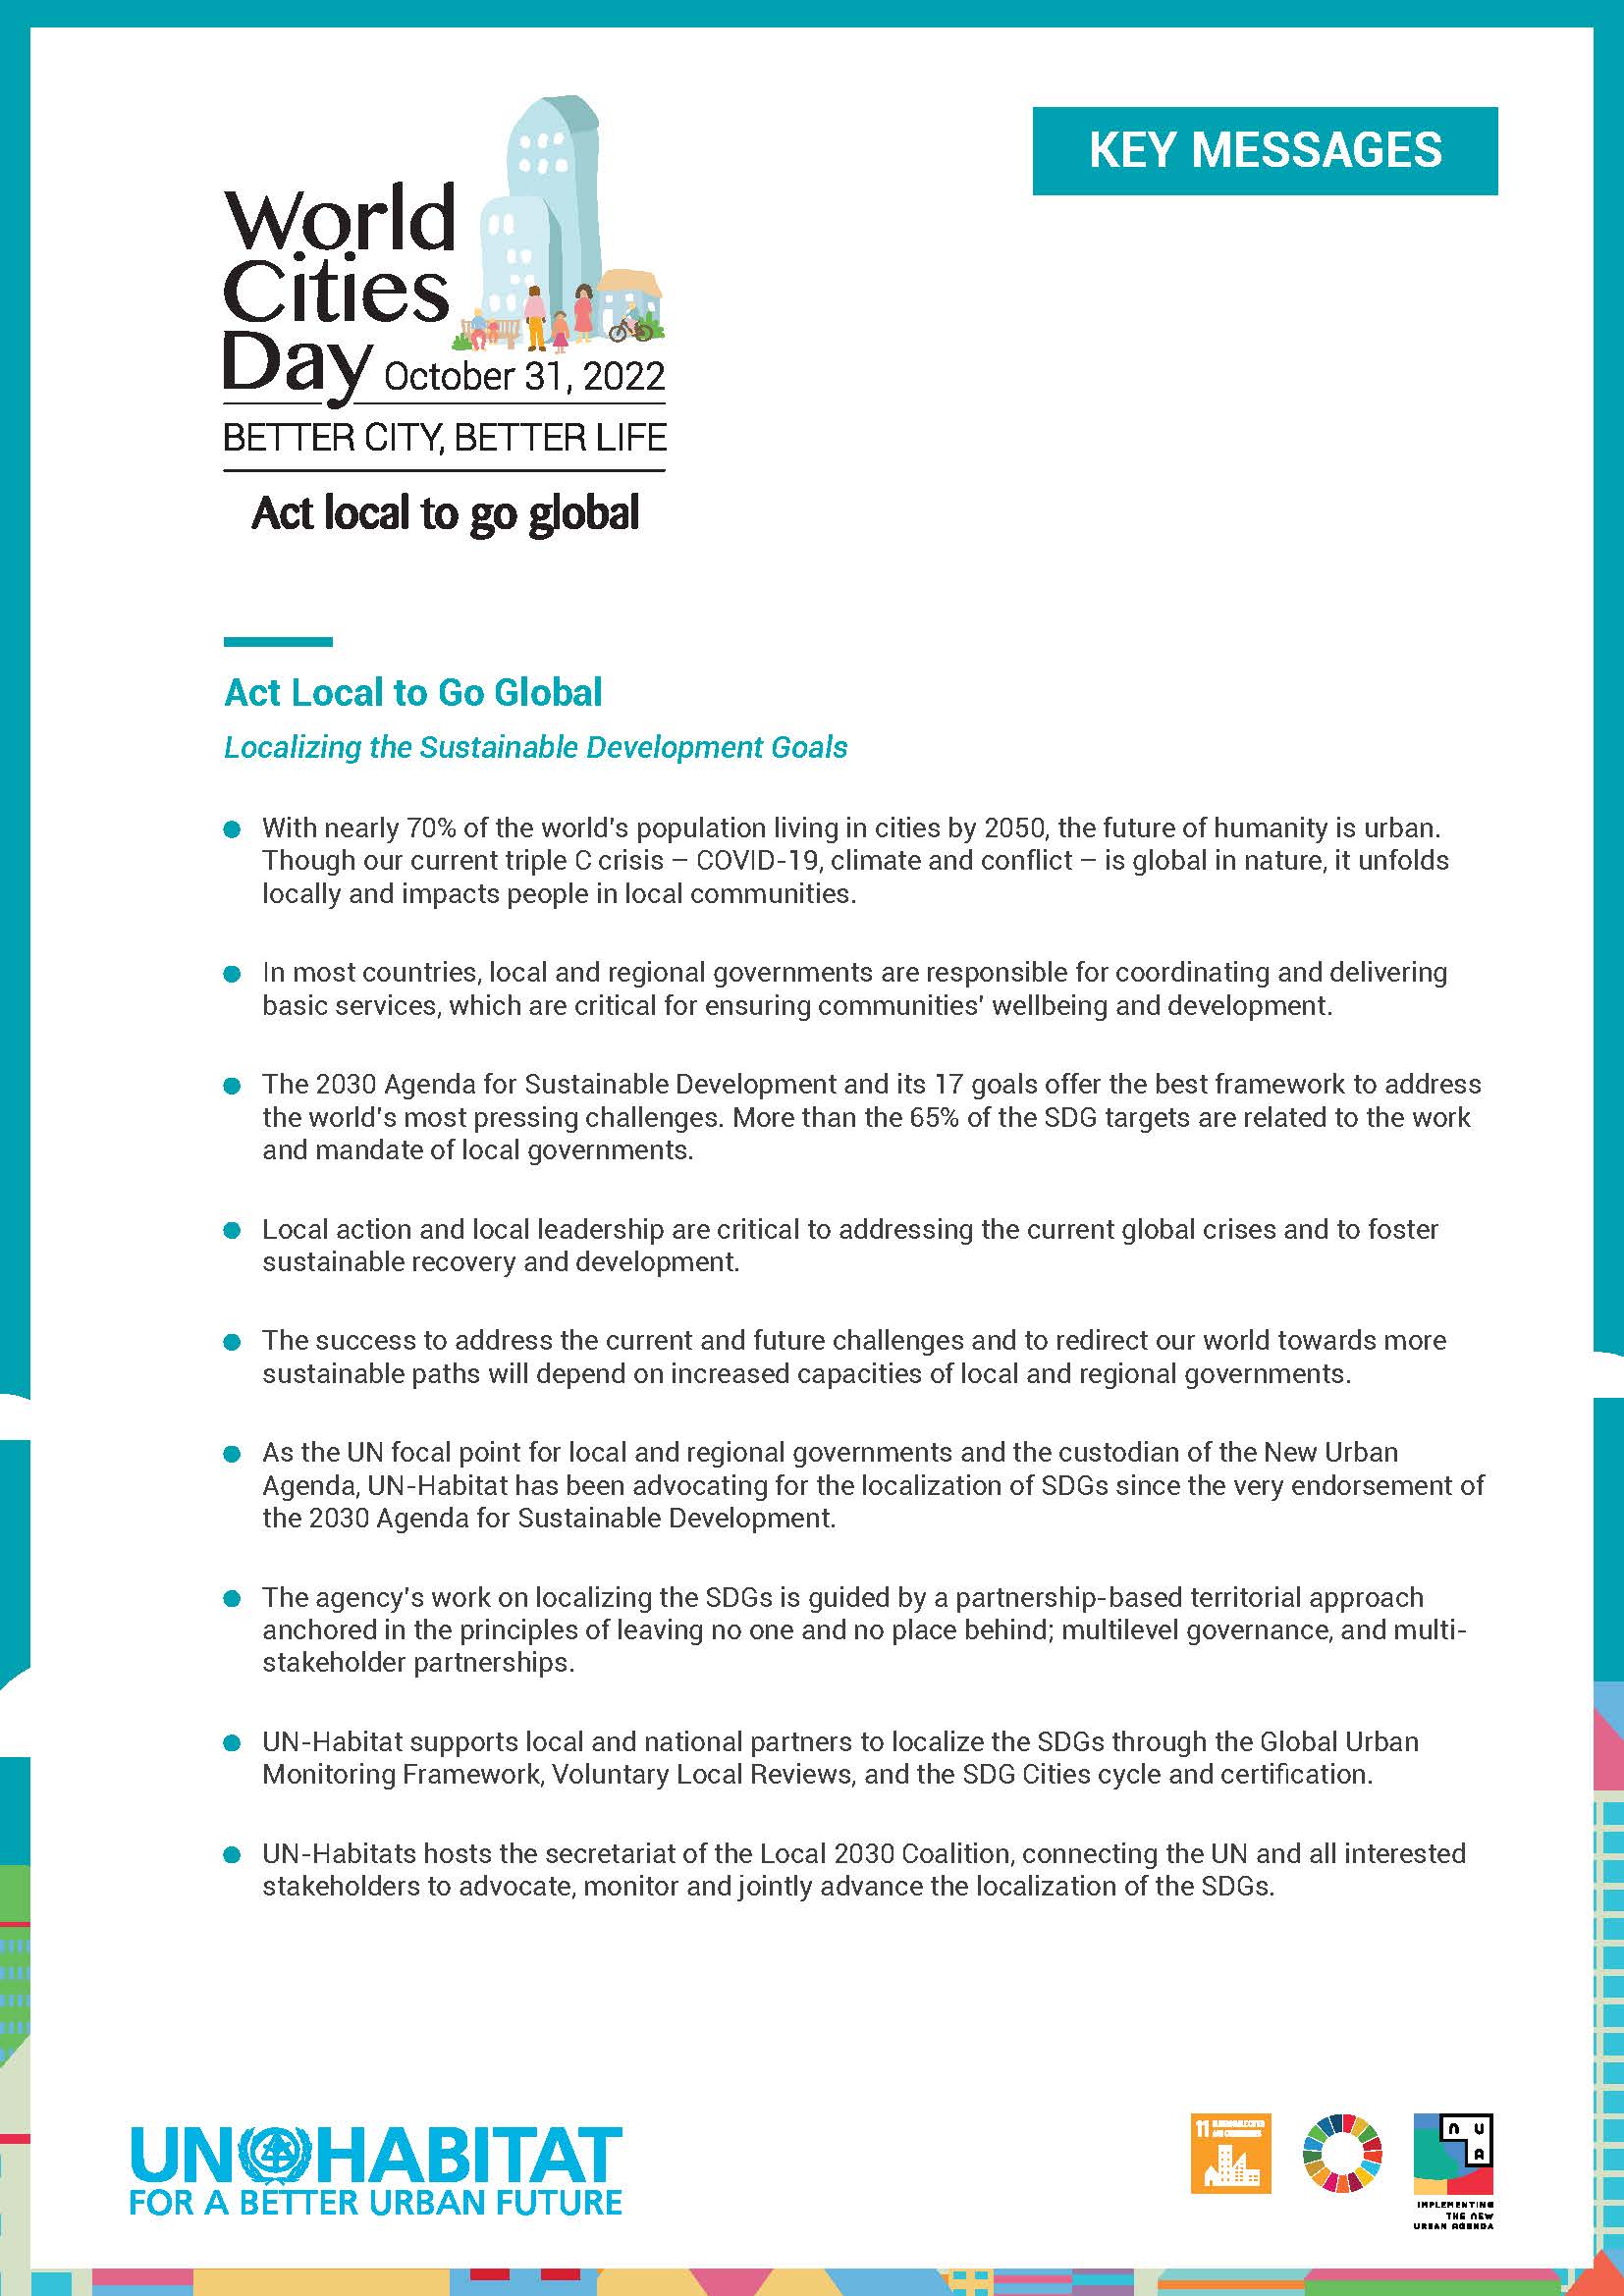 United Nations Centre for Human Settlements  - <p>A one-page, bulleted summary of the key messages of UN-HABITAT for World Cities Day, October 31, 2022.</p>